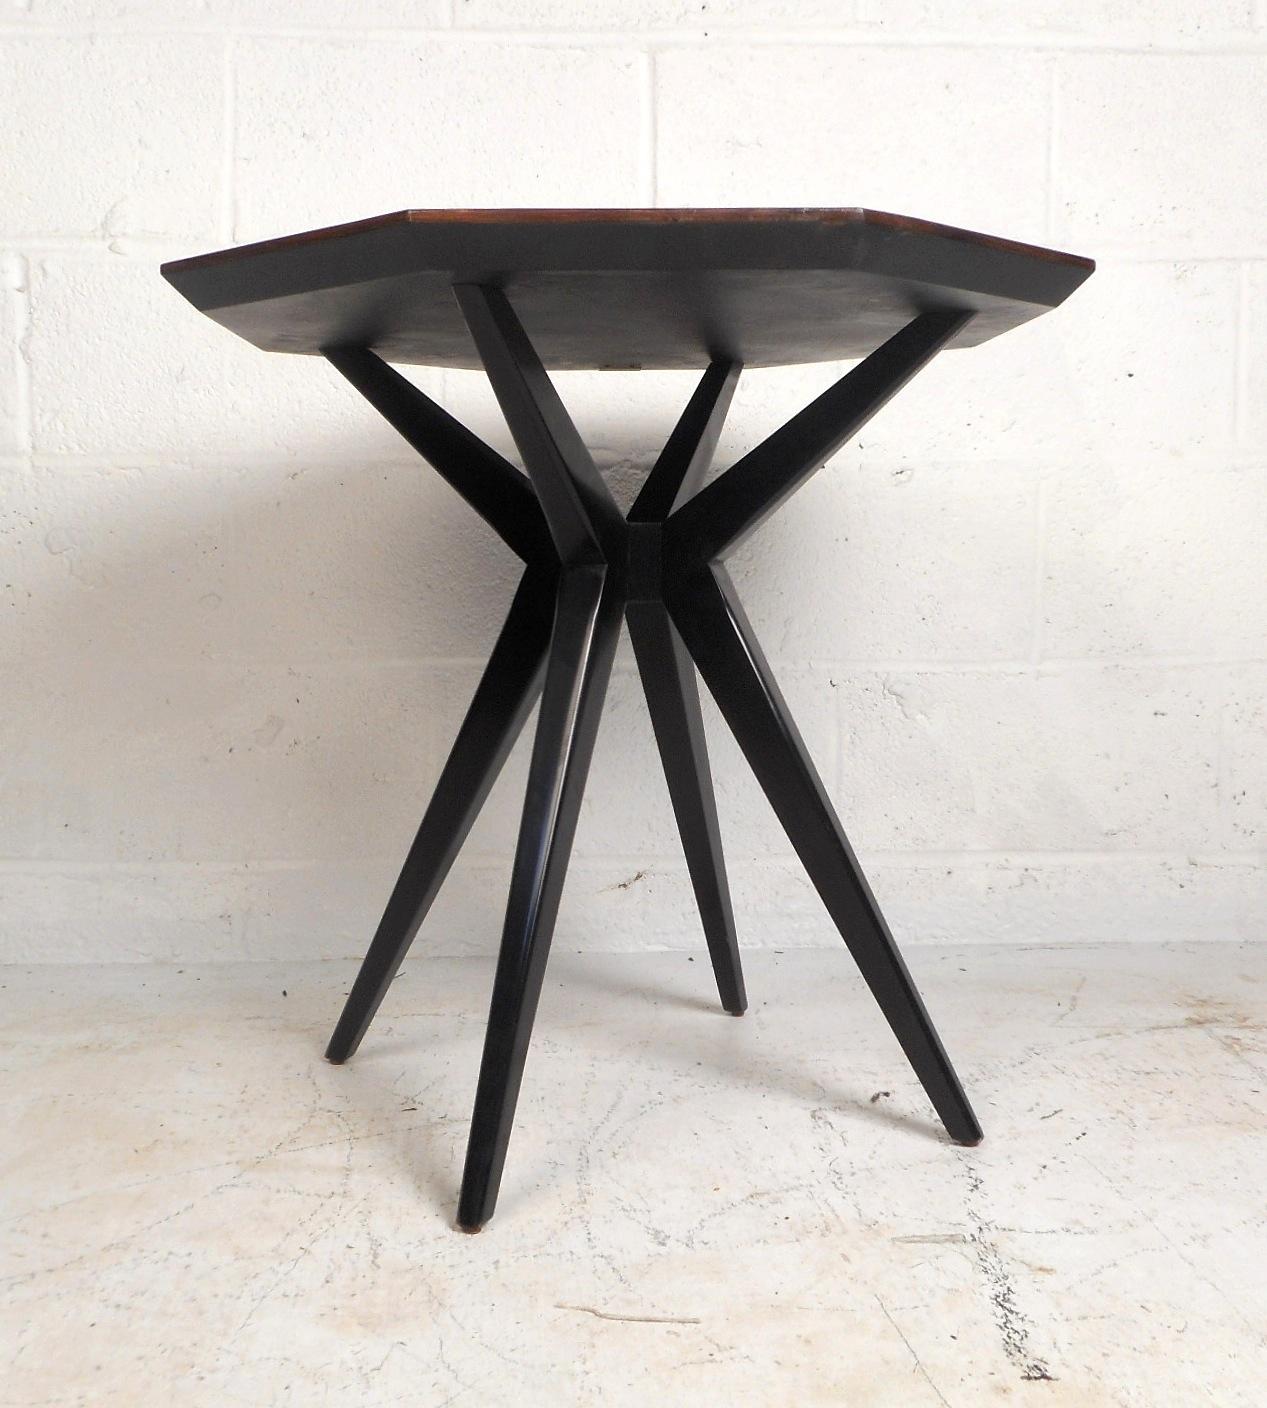 This stunning end table mixes contemporary style with classic sensibilities to produce a unique allure. The table has a rosewood finish and a starburst pattern on top. Beneath the tabletop are splayed onyx legs in a sleek design. This Kate Spade end